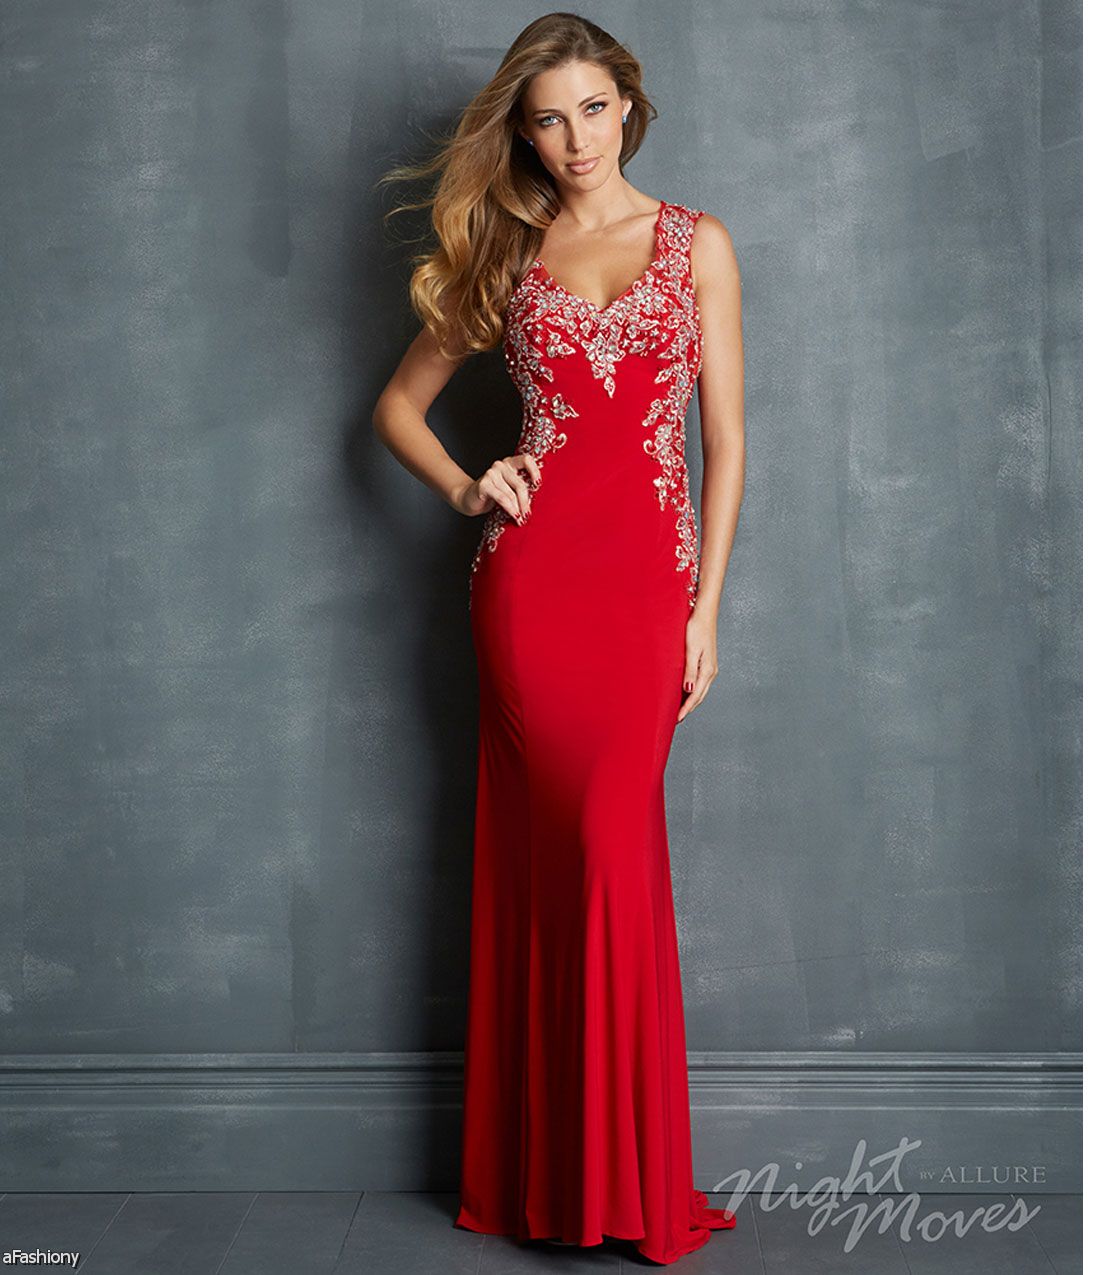 Gorgeous Prom Dresses That Will Make You The Prom Queen - fashionsy.com